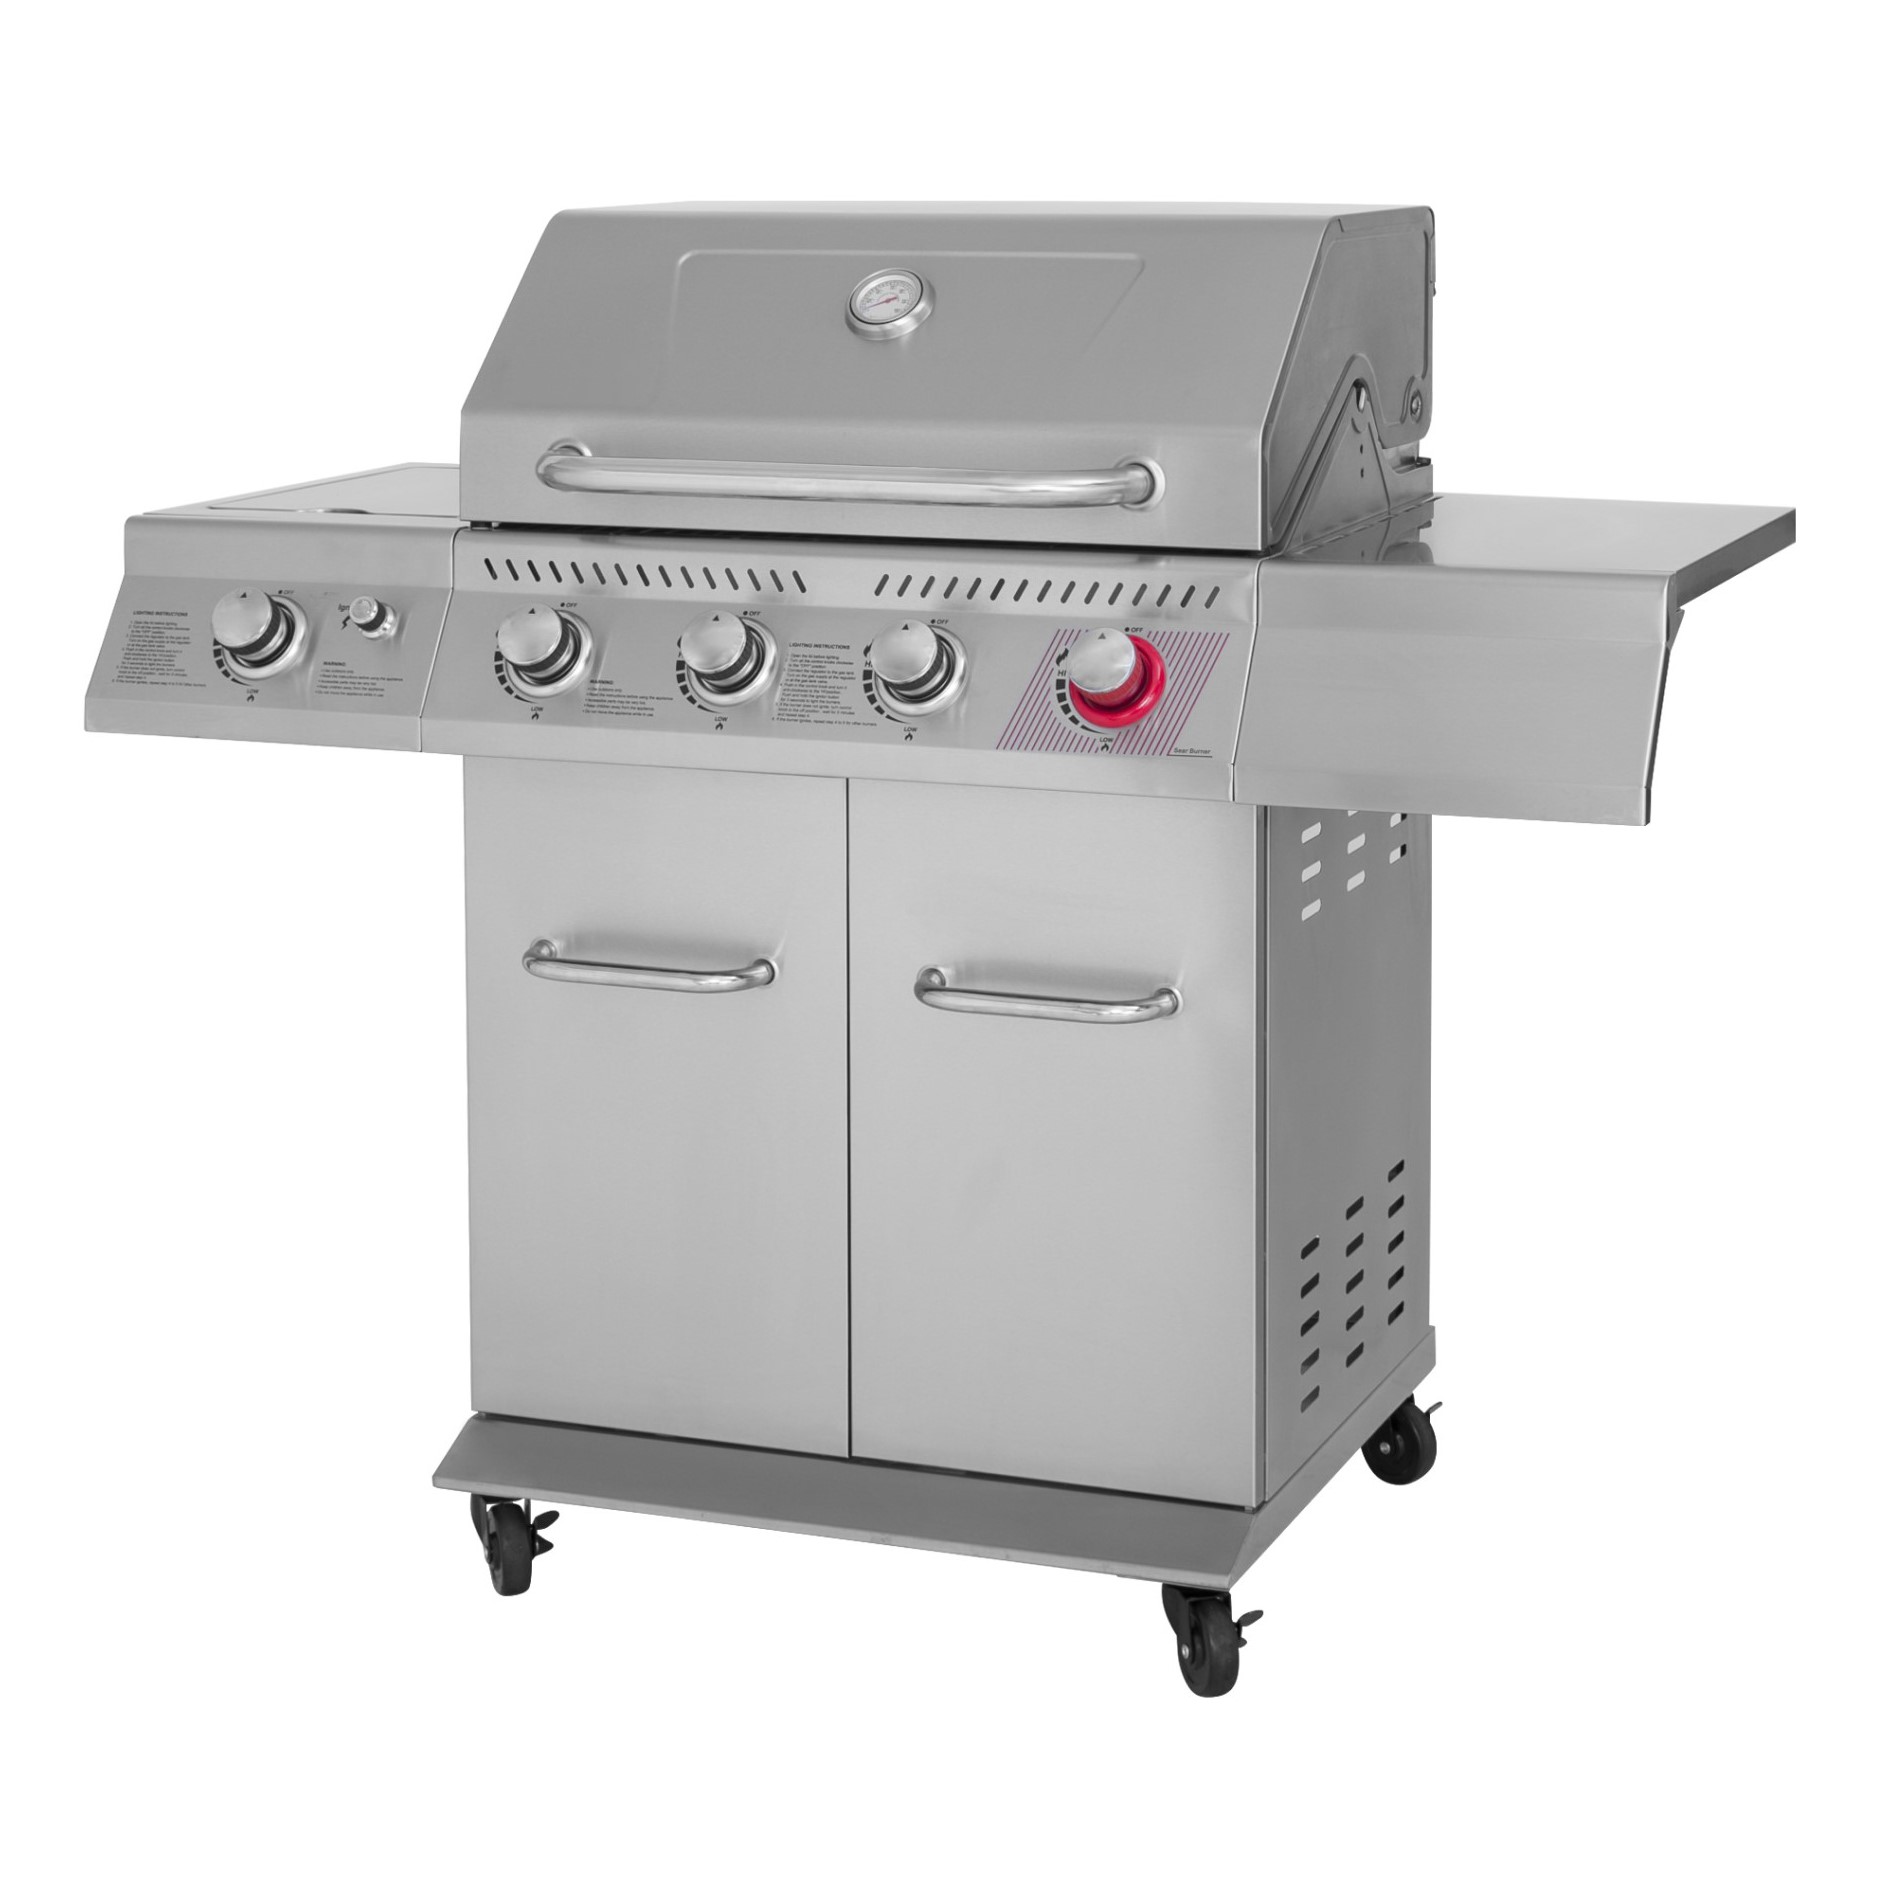 4 Burners Stainless Steel Gas Grill, with Stainless Steel Firebox and High Temperature Main Burner